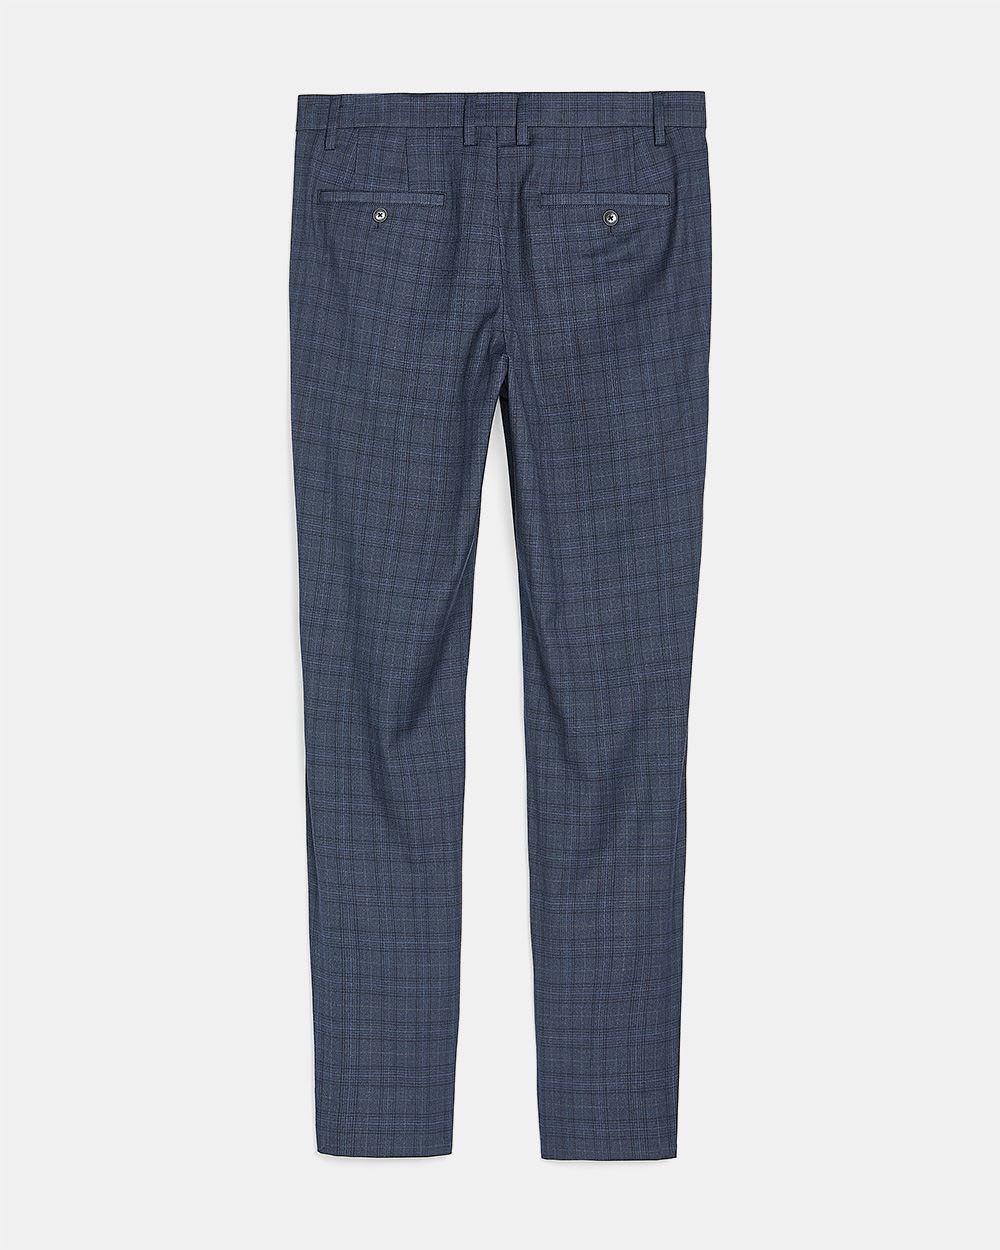 Slim Fit Navy Checkered City Pant - 32"